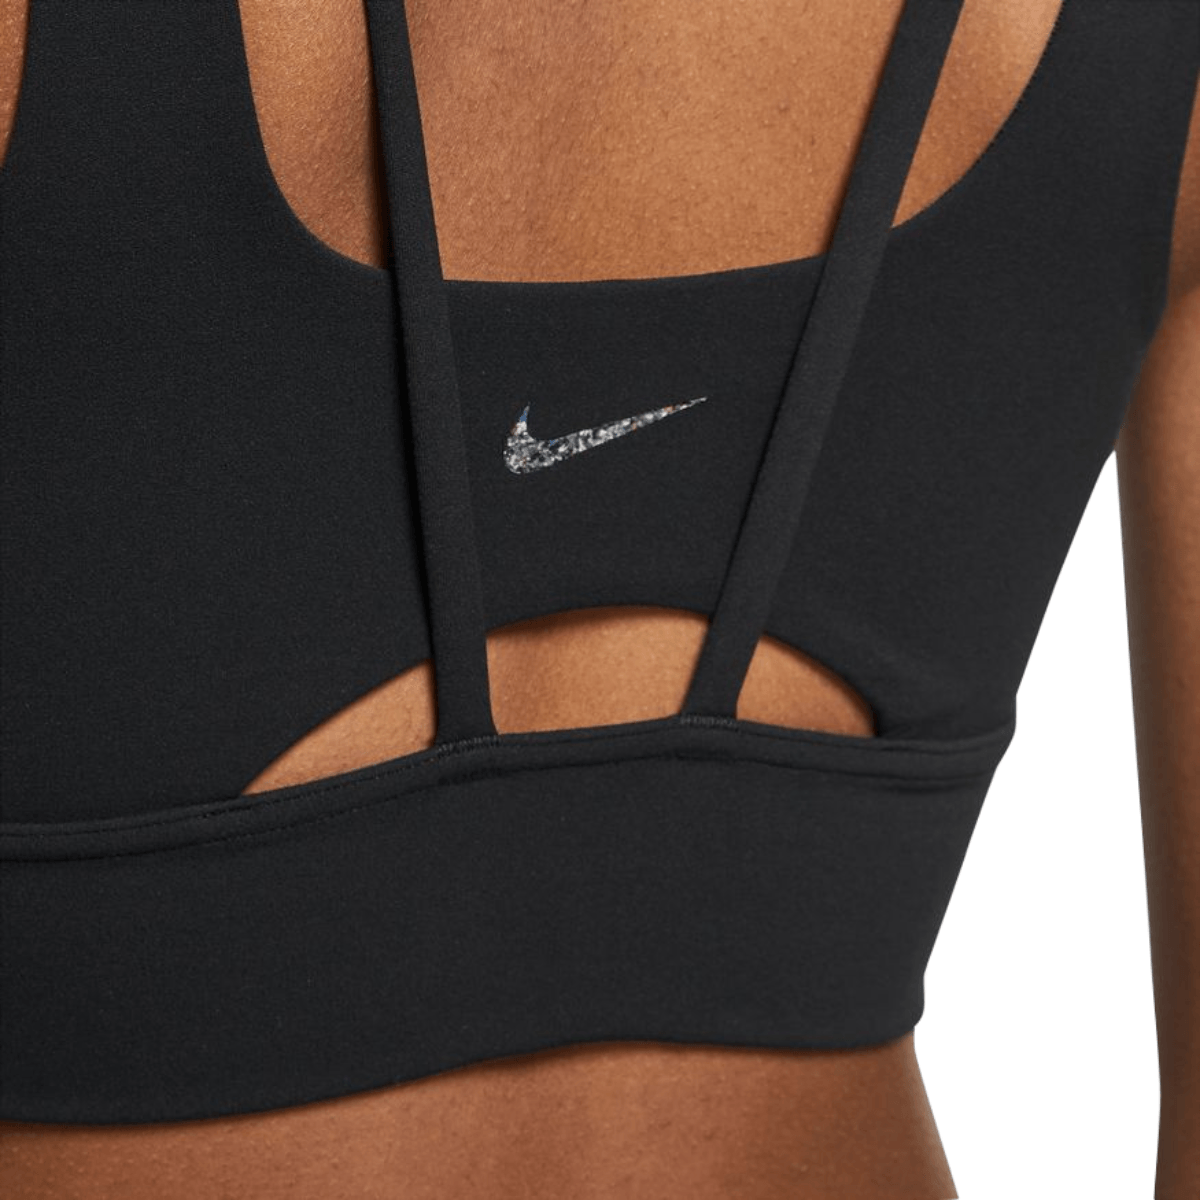 Real talk: Nike Alate just might be THAT sports bra. We asked our Nike Alate  models what they thought of the bra, and here's what we he